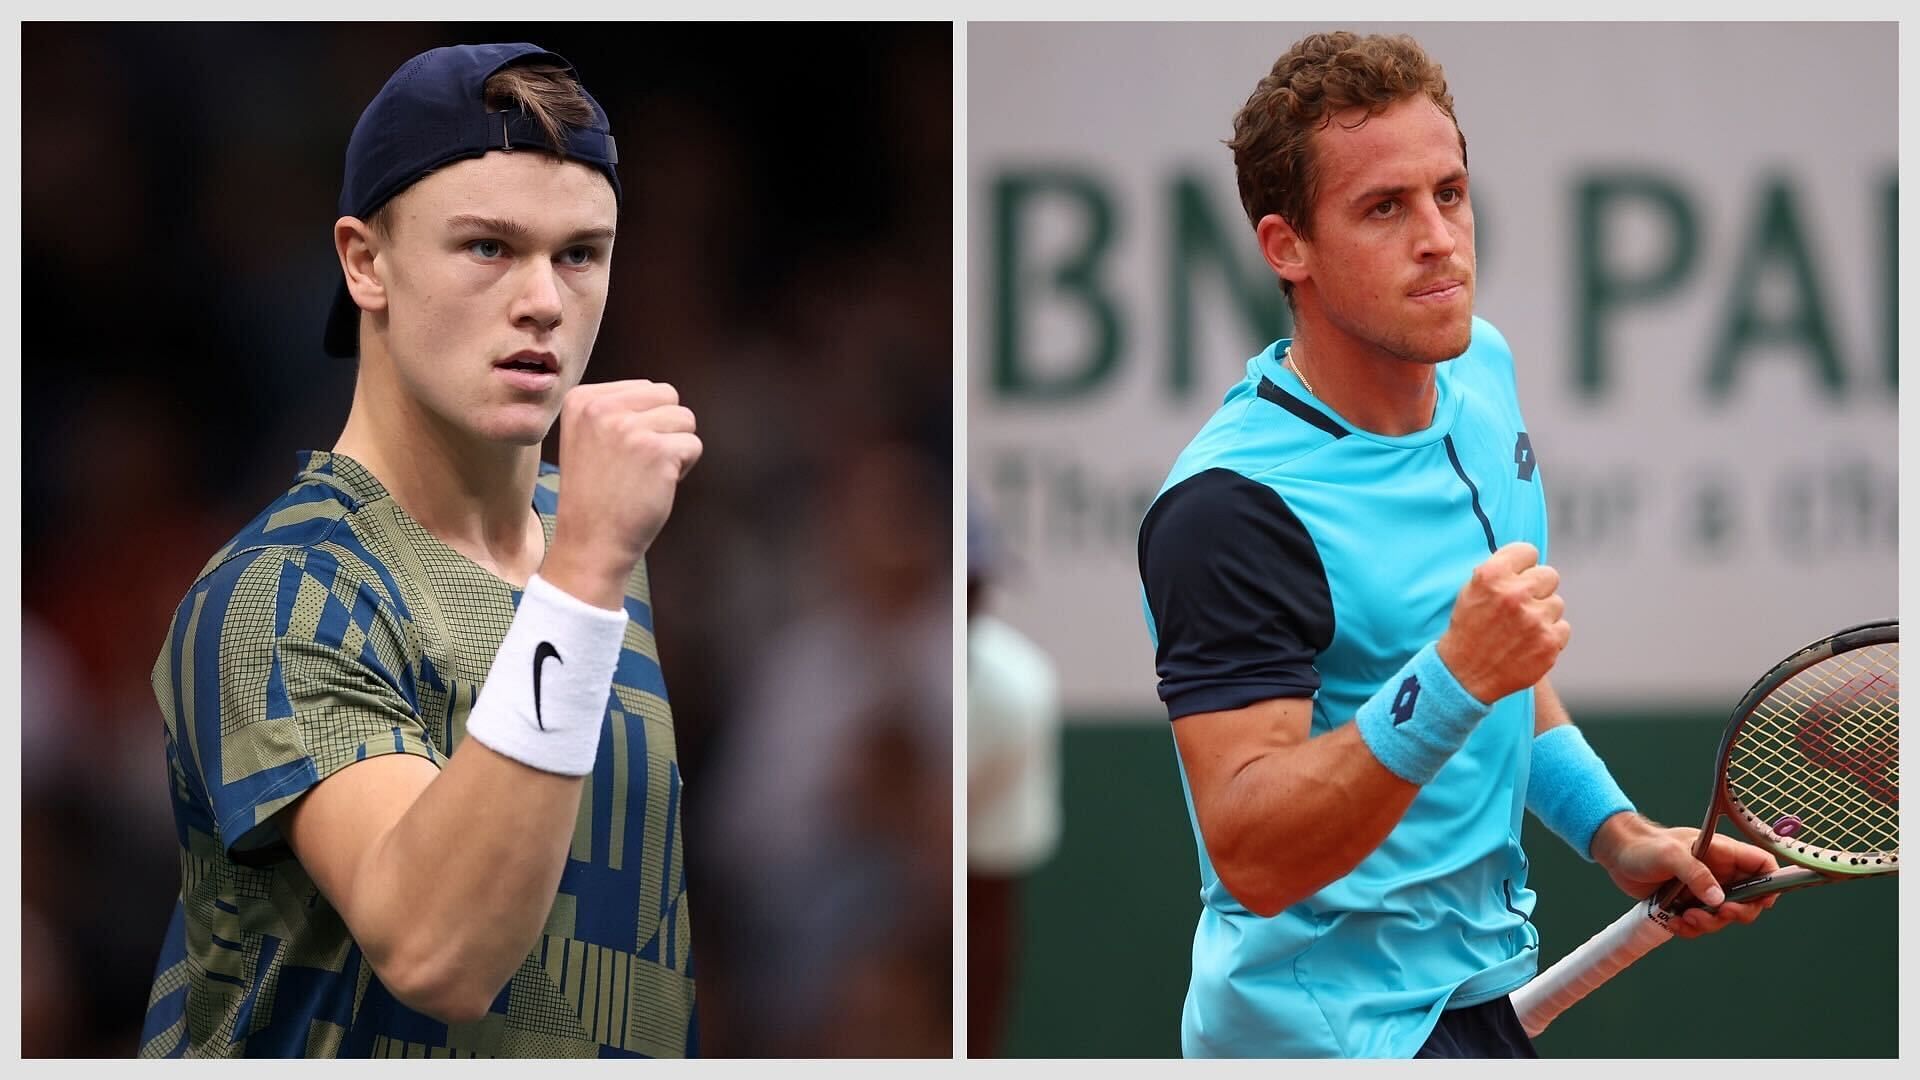 Holger Rune vs Roberto Carballes Baena is one of the first-round matches at the 2023 US Open.